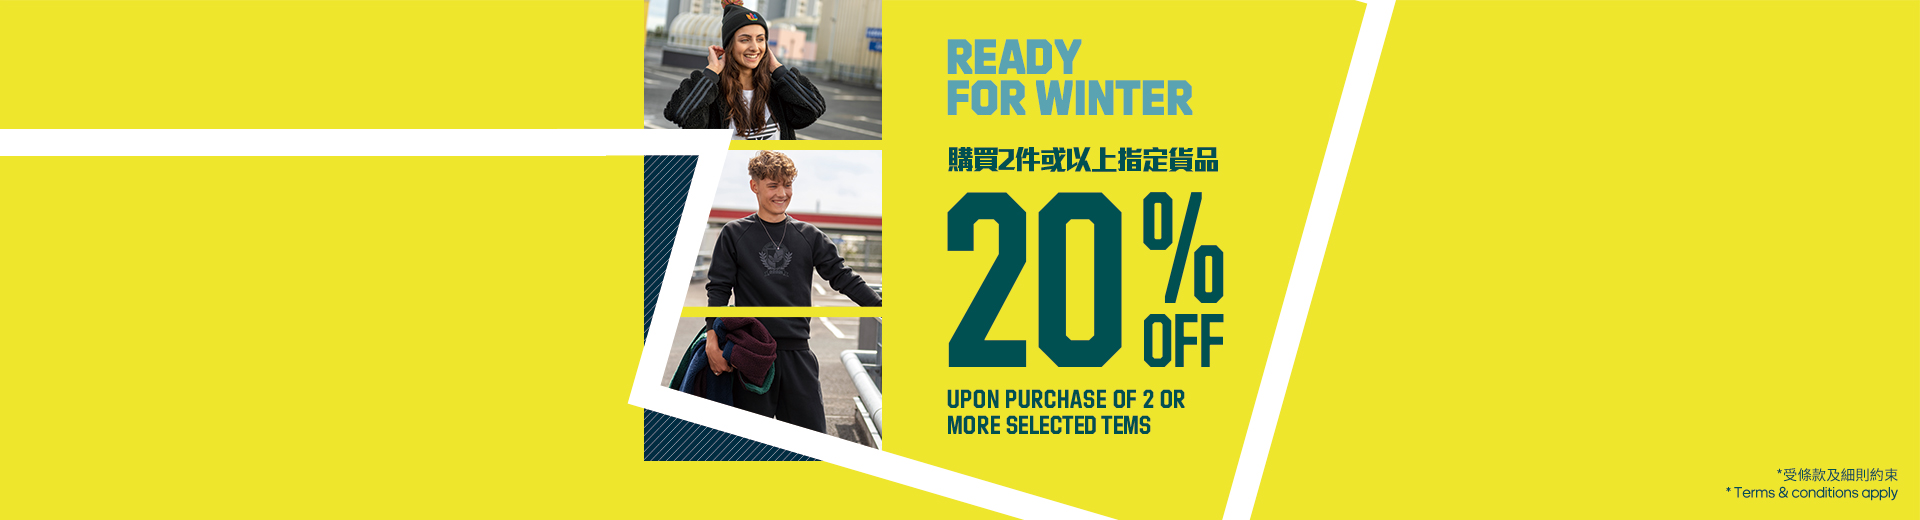 adidas - READY FOR WINTER SALE 八折優惠 